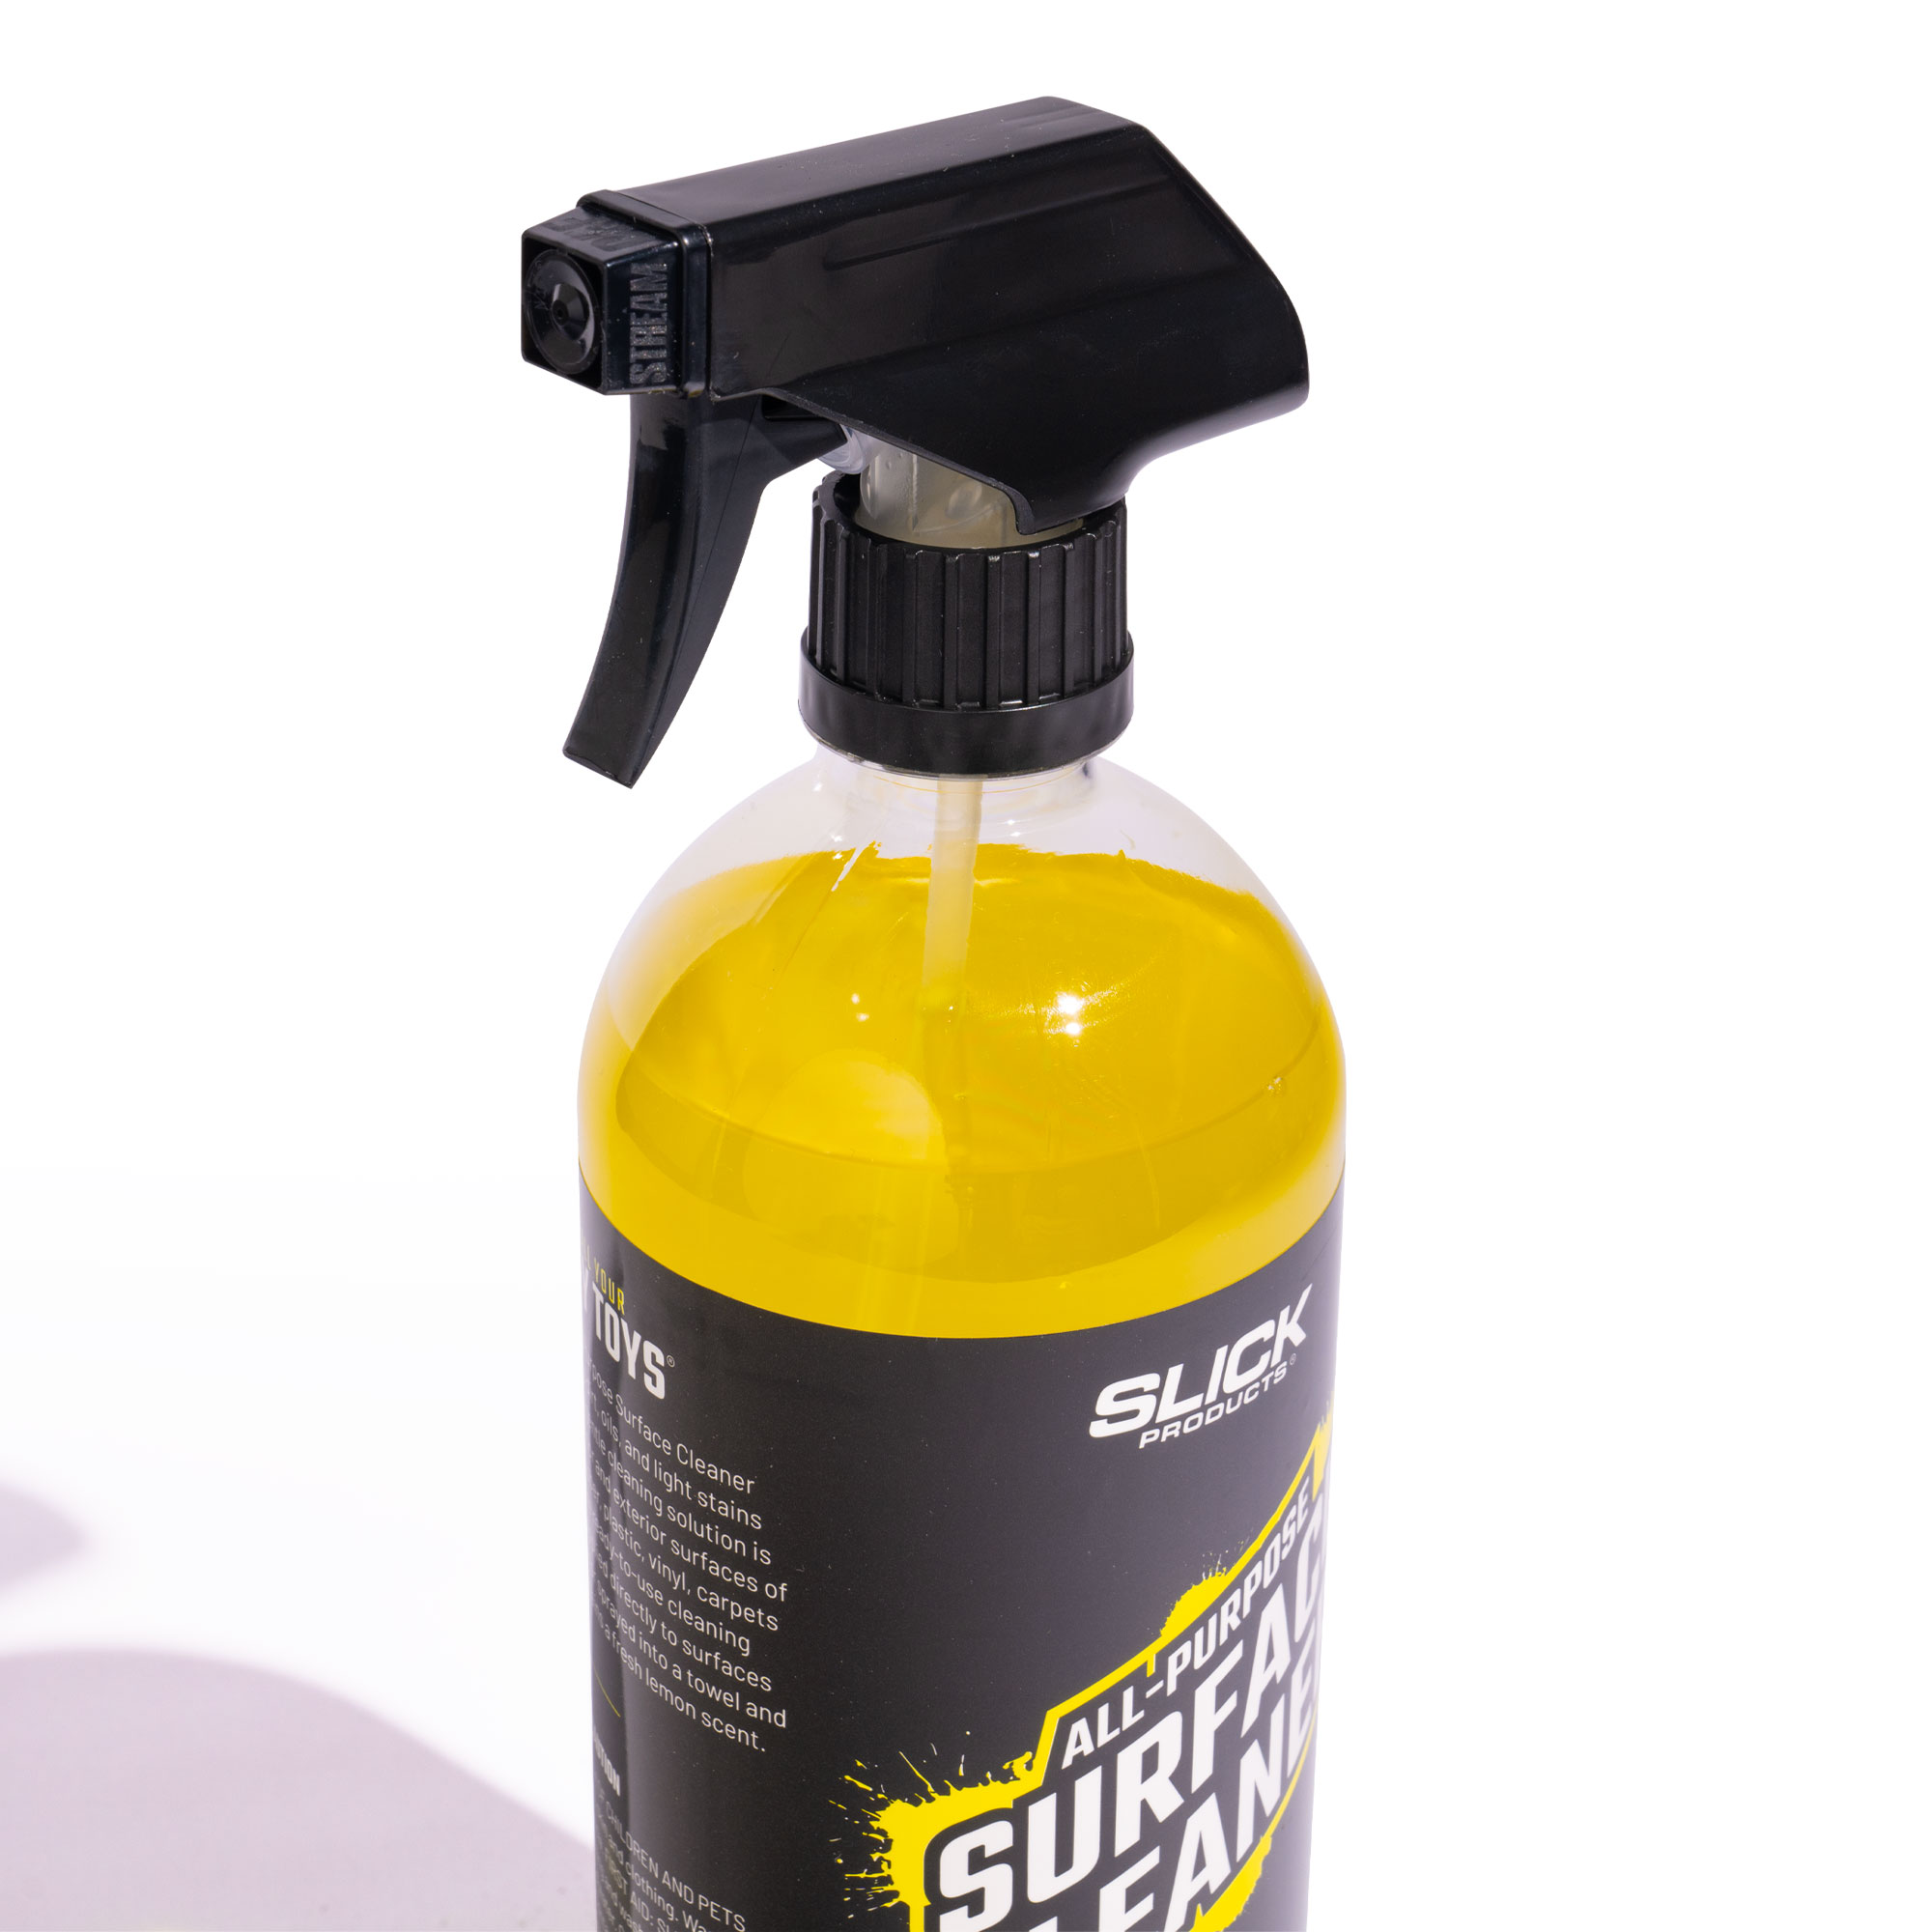 Slick Products SP-APSC-32 All Purpose Surface Cleaner